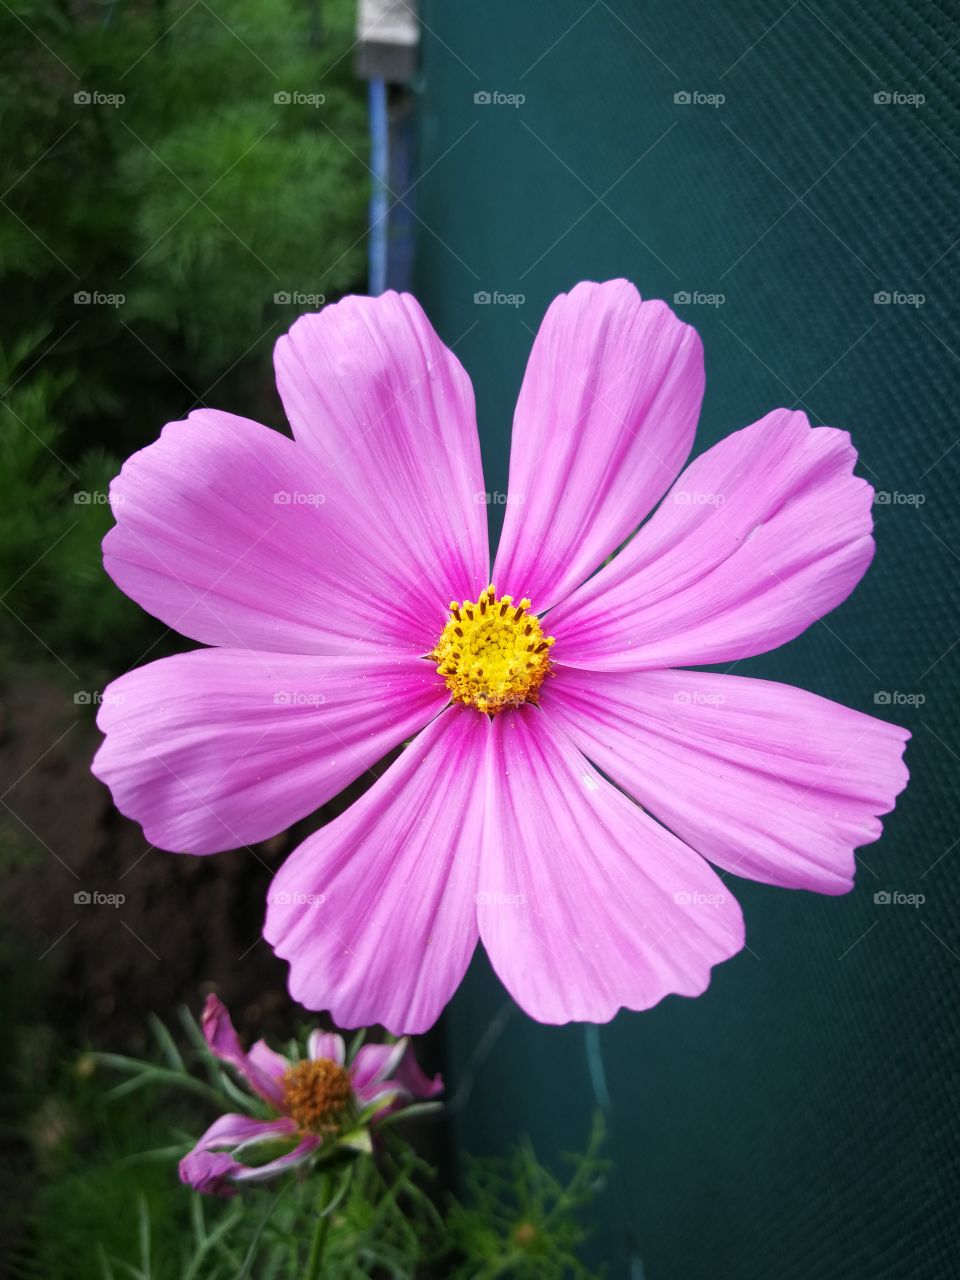 Garden treasures 🌺 without filter - pink mellow